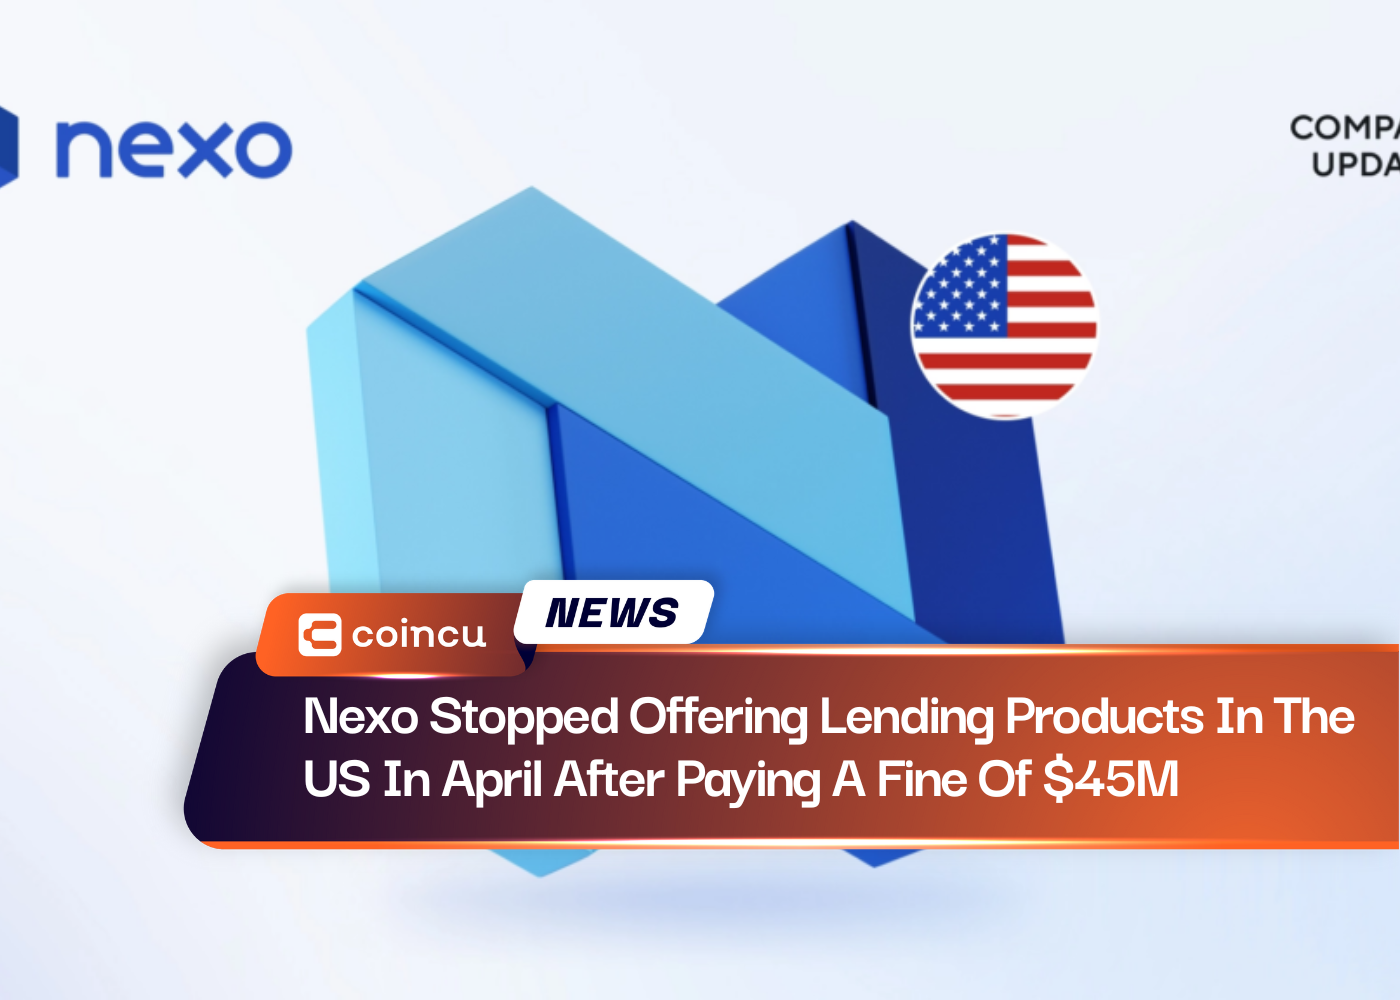 Nexo Stopped Offering Lending Products In The US In April After Paying A Fine Of $45M